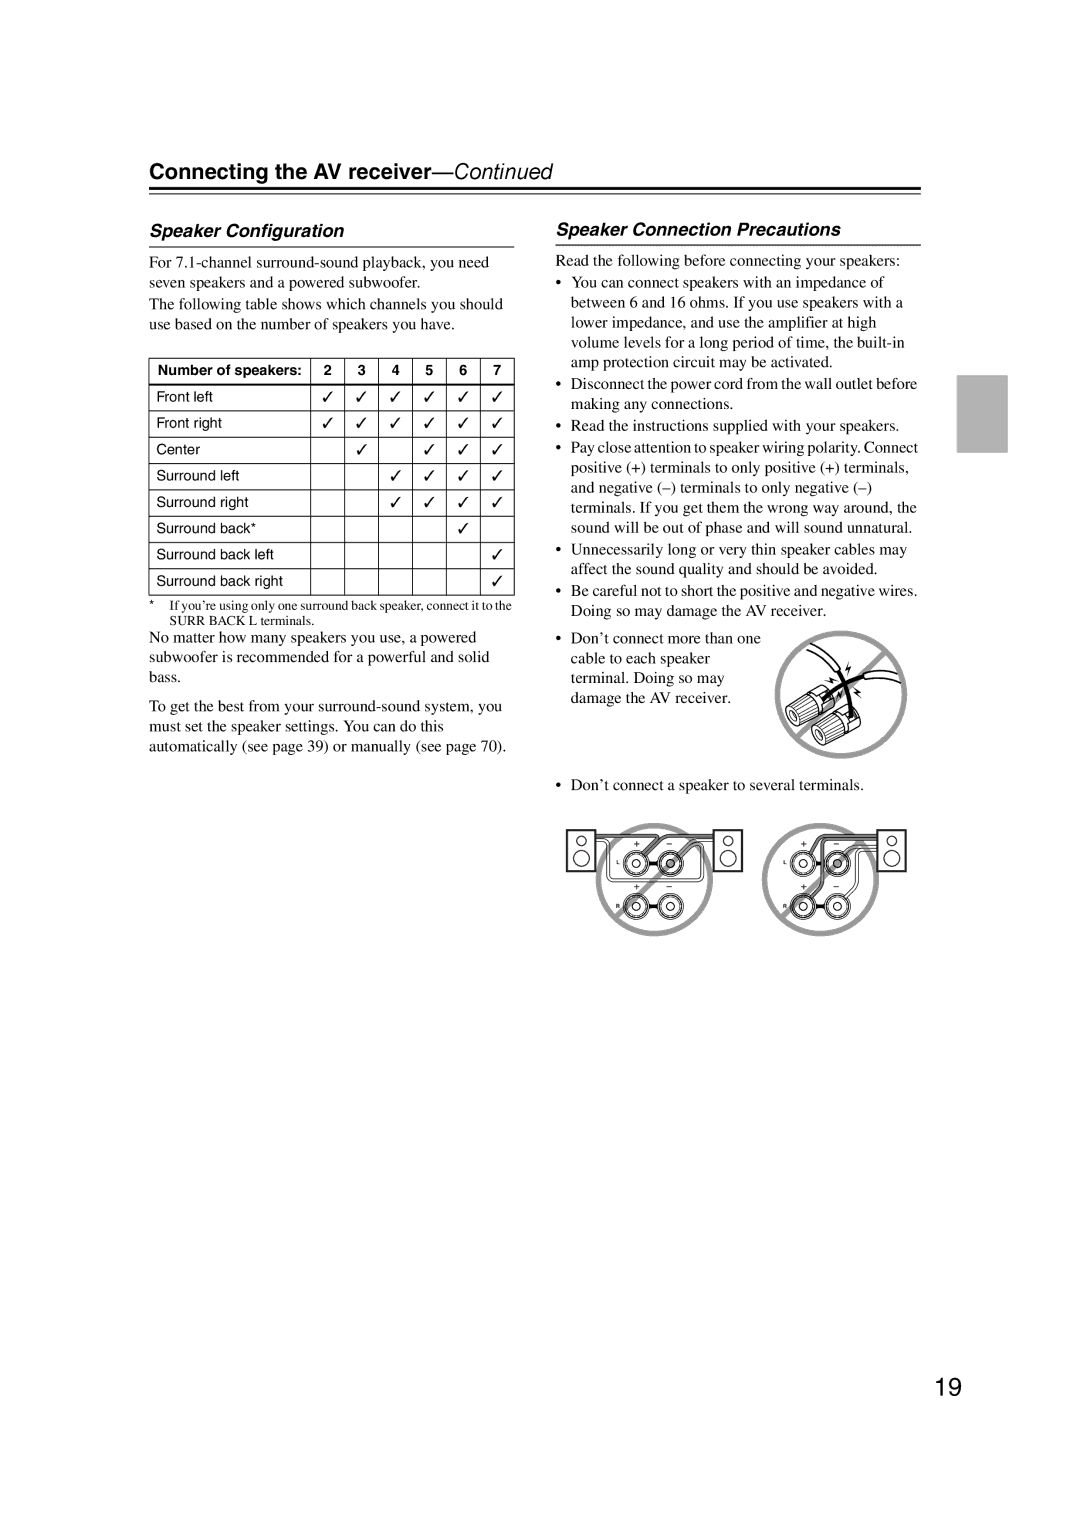 Onkyo HT-S5200 instruction manual Connecting the AV receiver, Speaker Configuration, Speaker Connection Precautions 